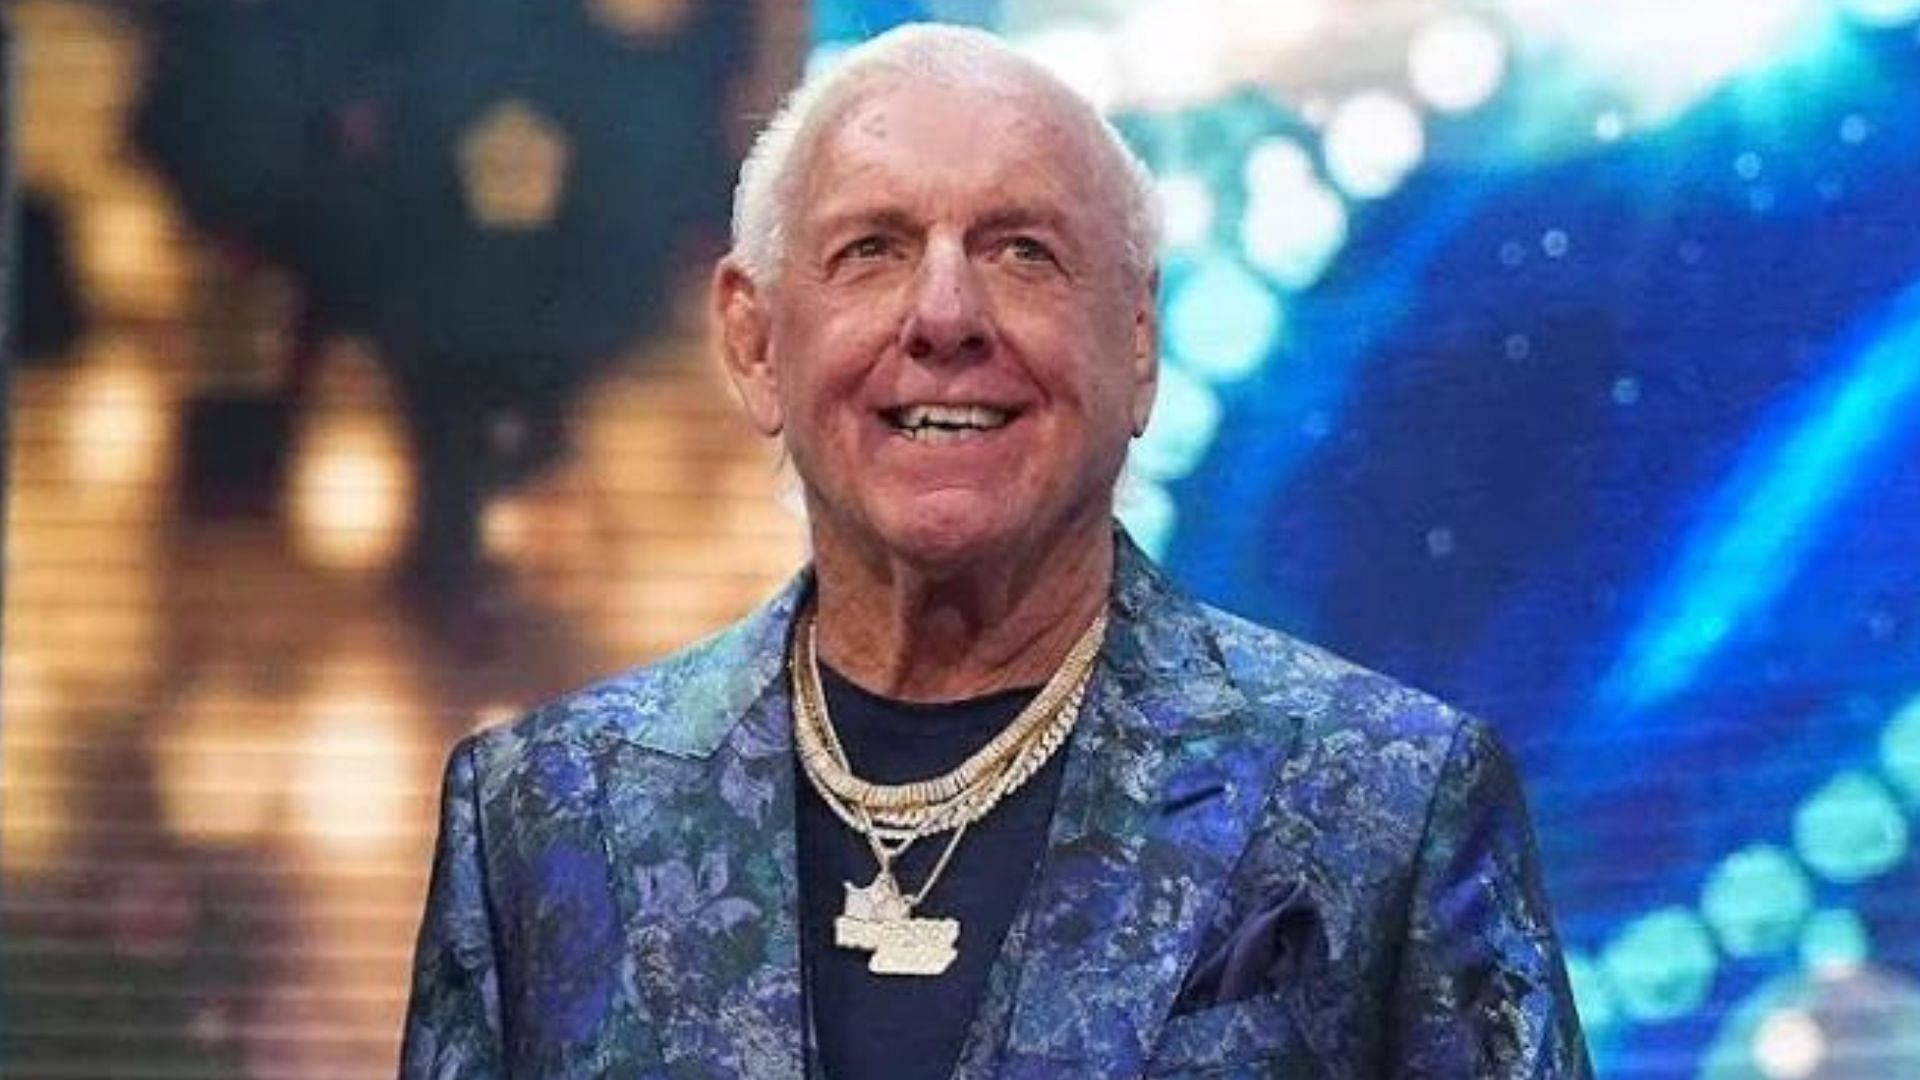 How many people knew about Ric Flair